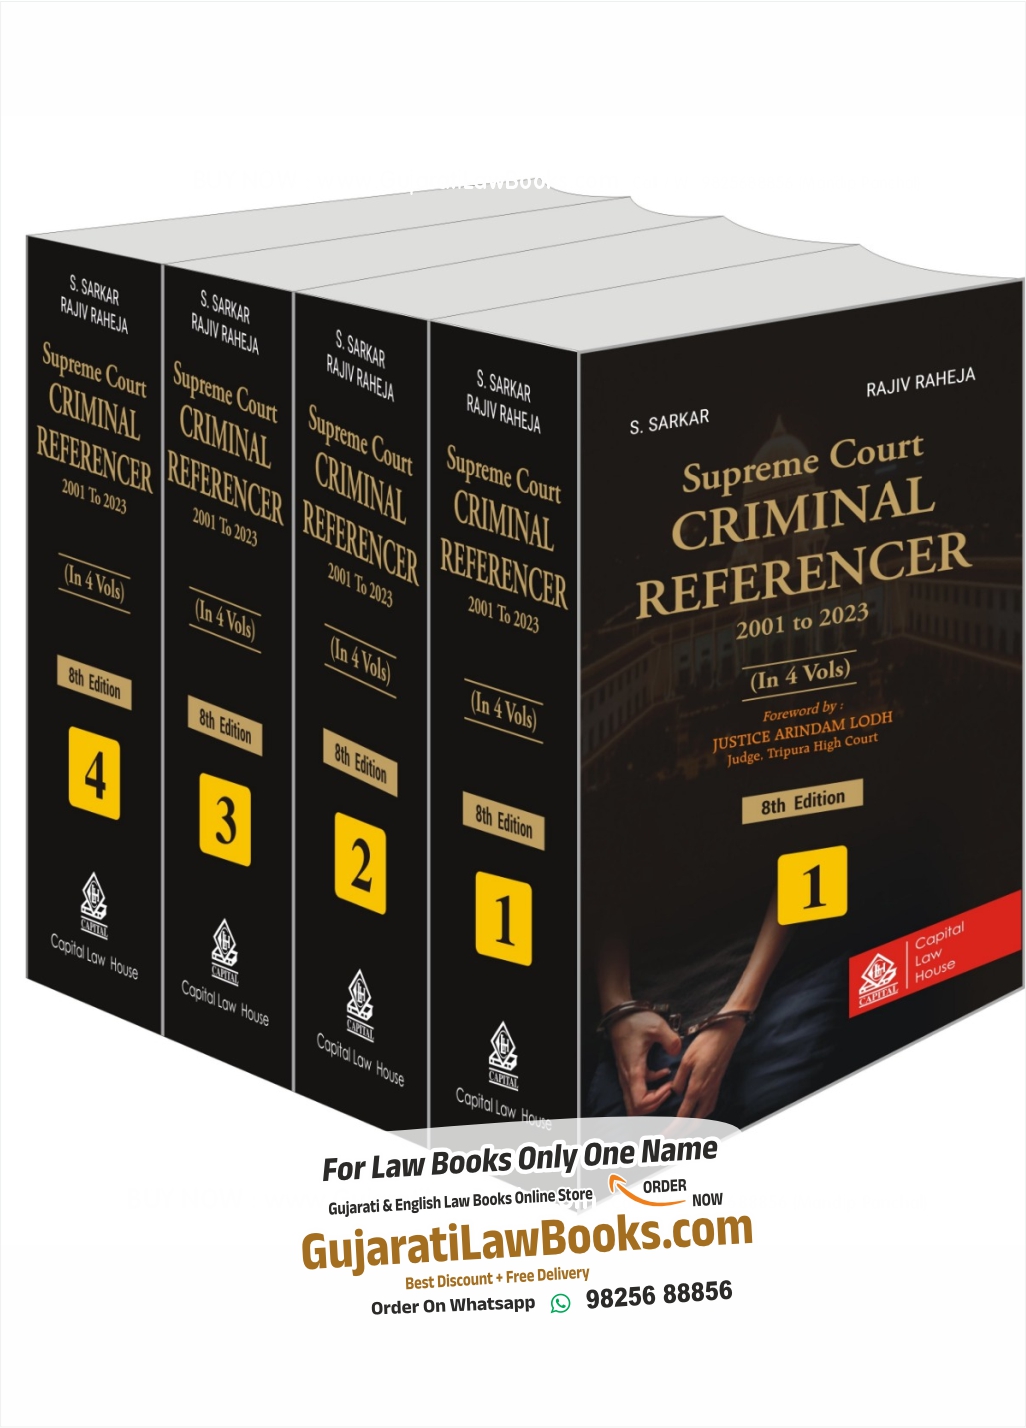 Criminal　Edition　2023　2023　Volume)　Law　8th　2001　Latest　–　Referencer　(in　House　Court　Supreme　by　Capital　to　October　–